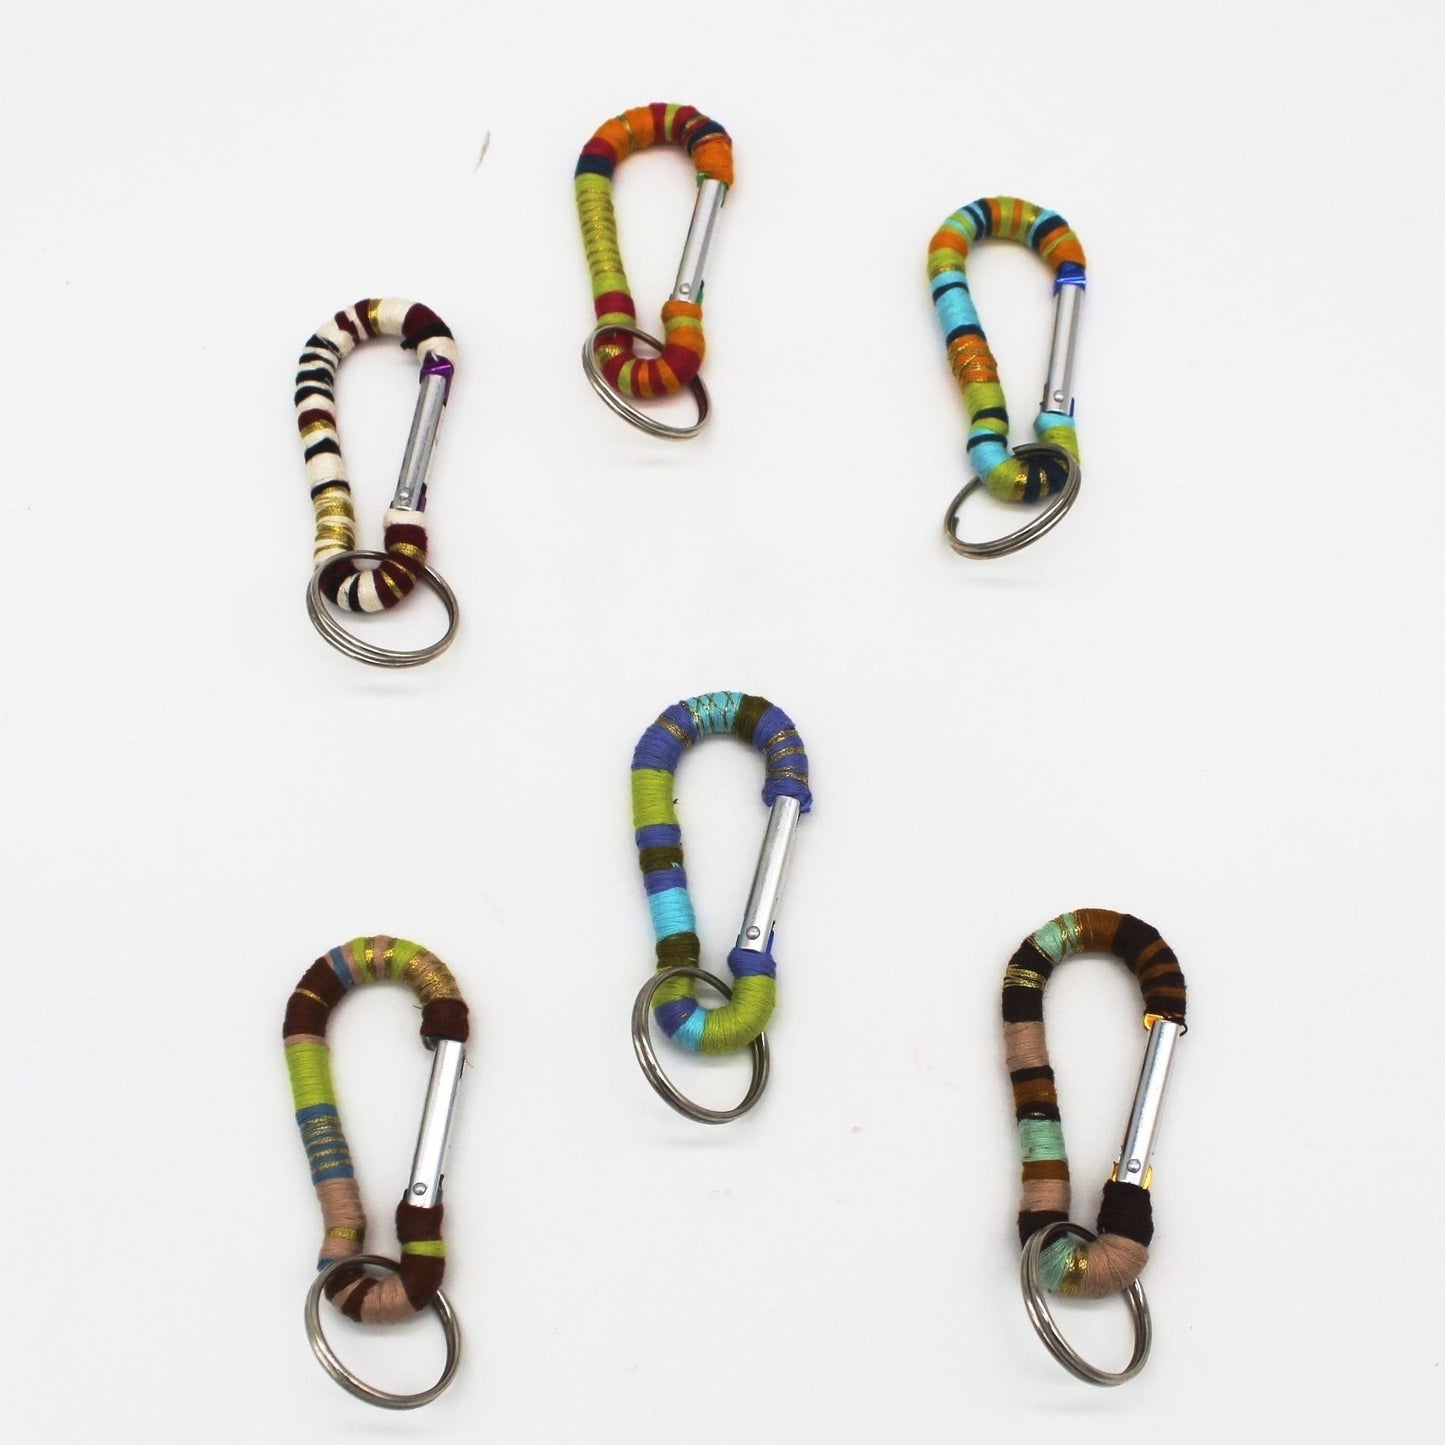 Carabiner keychains, 6 vibrant new colors in a set.